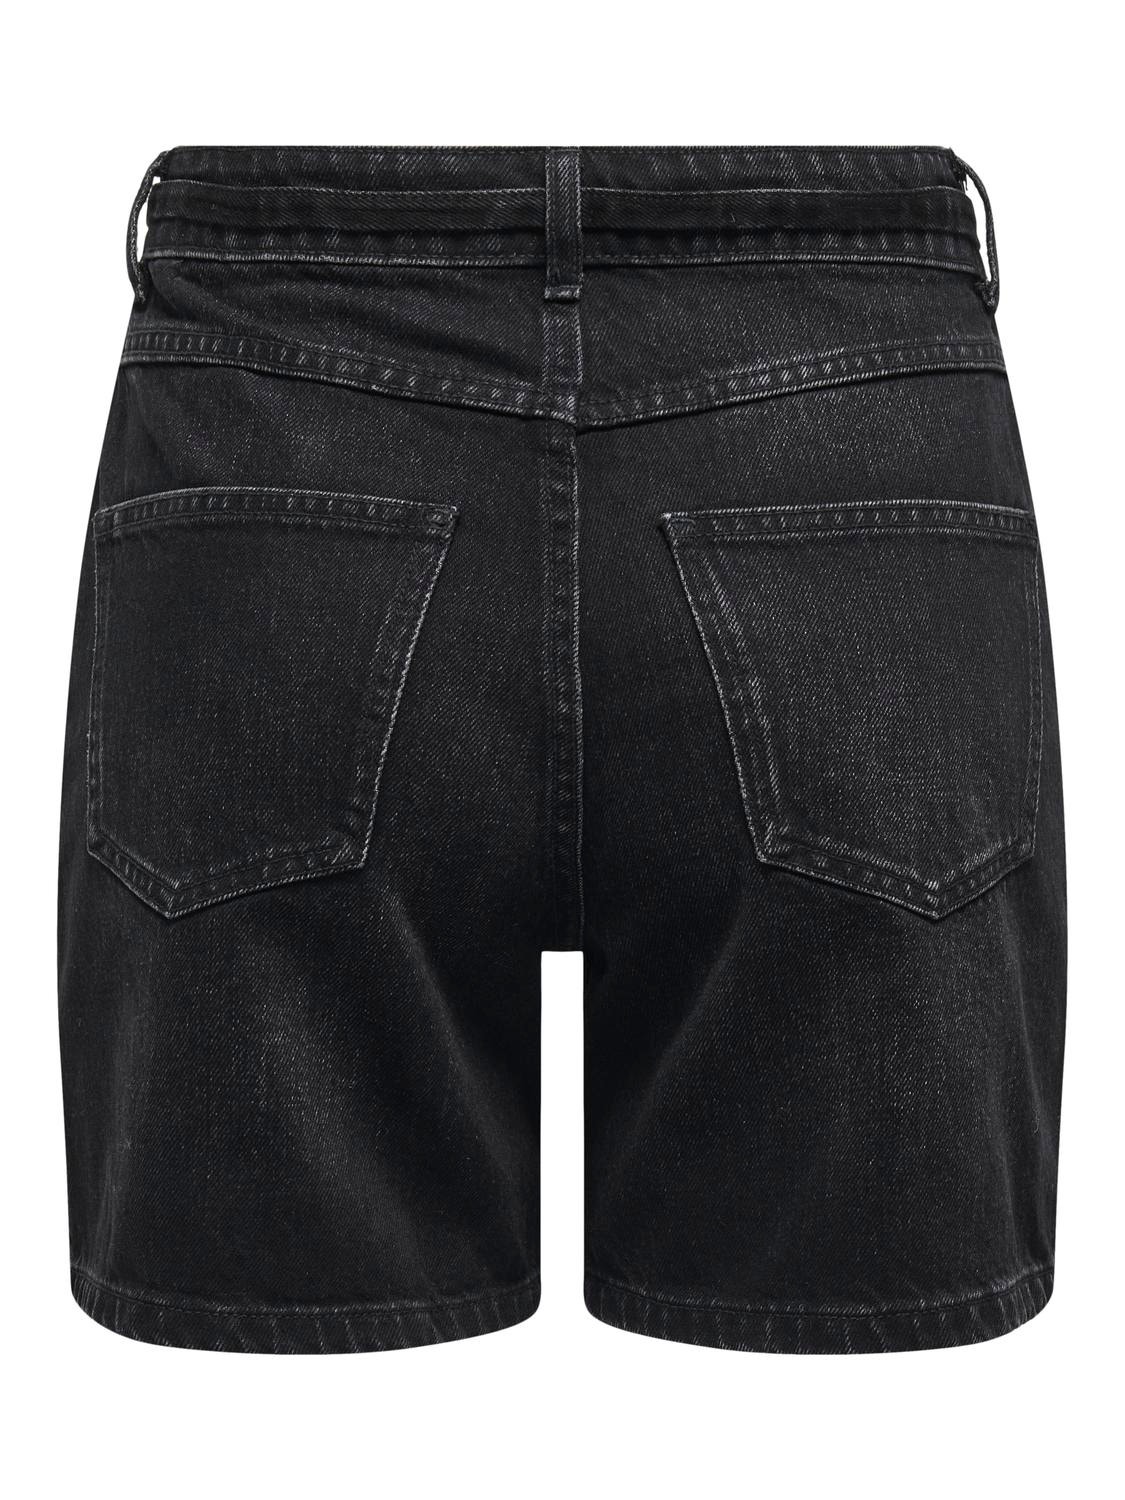 ONLY Normal geschnitten Mittlere Taille Shorts -Washed Black - 15340706